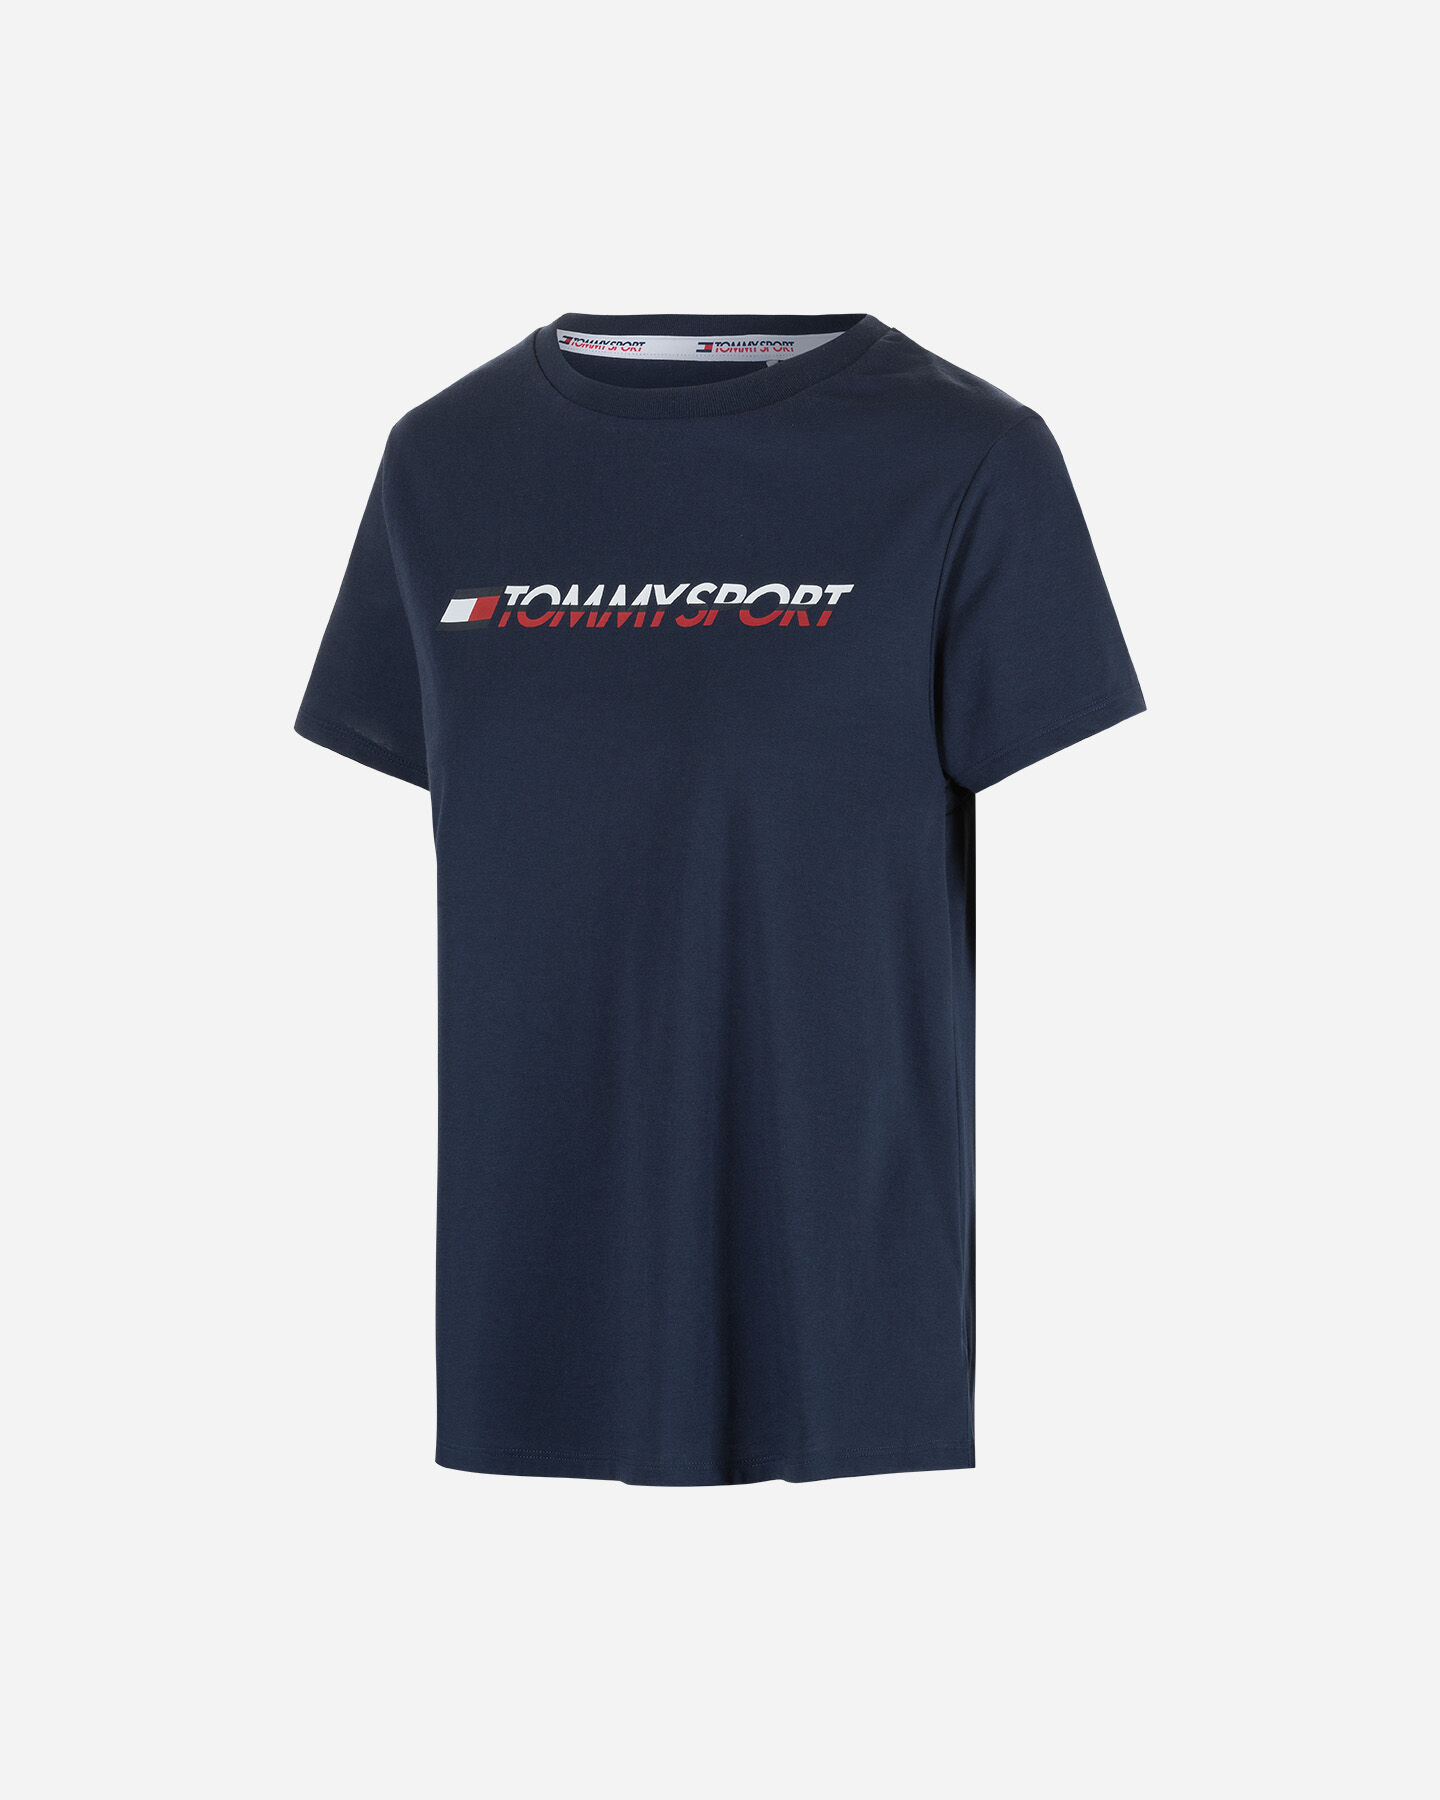  T-Shirt training TOMMY HILFIGER CLASSIC LOGO W S4073269|401|XS scatto 0